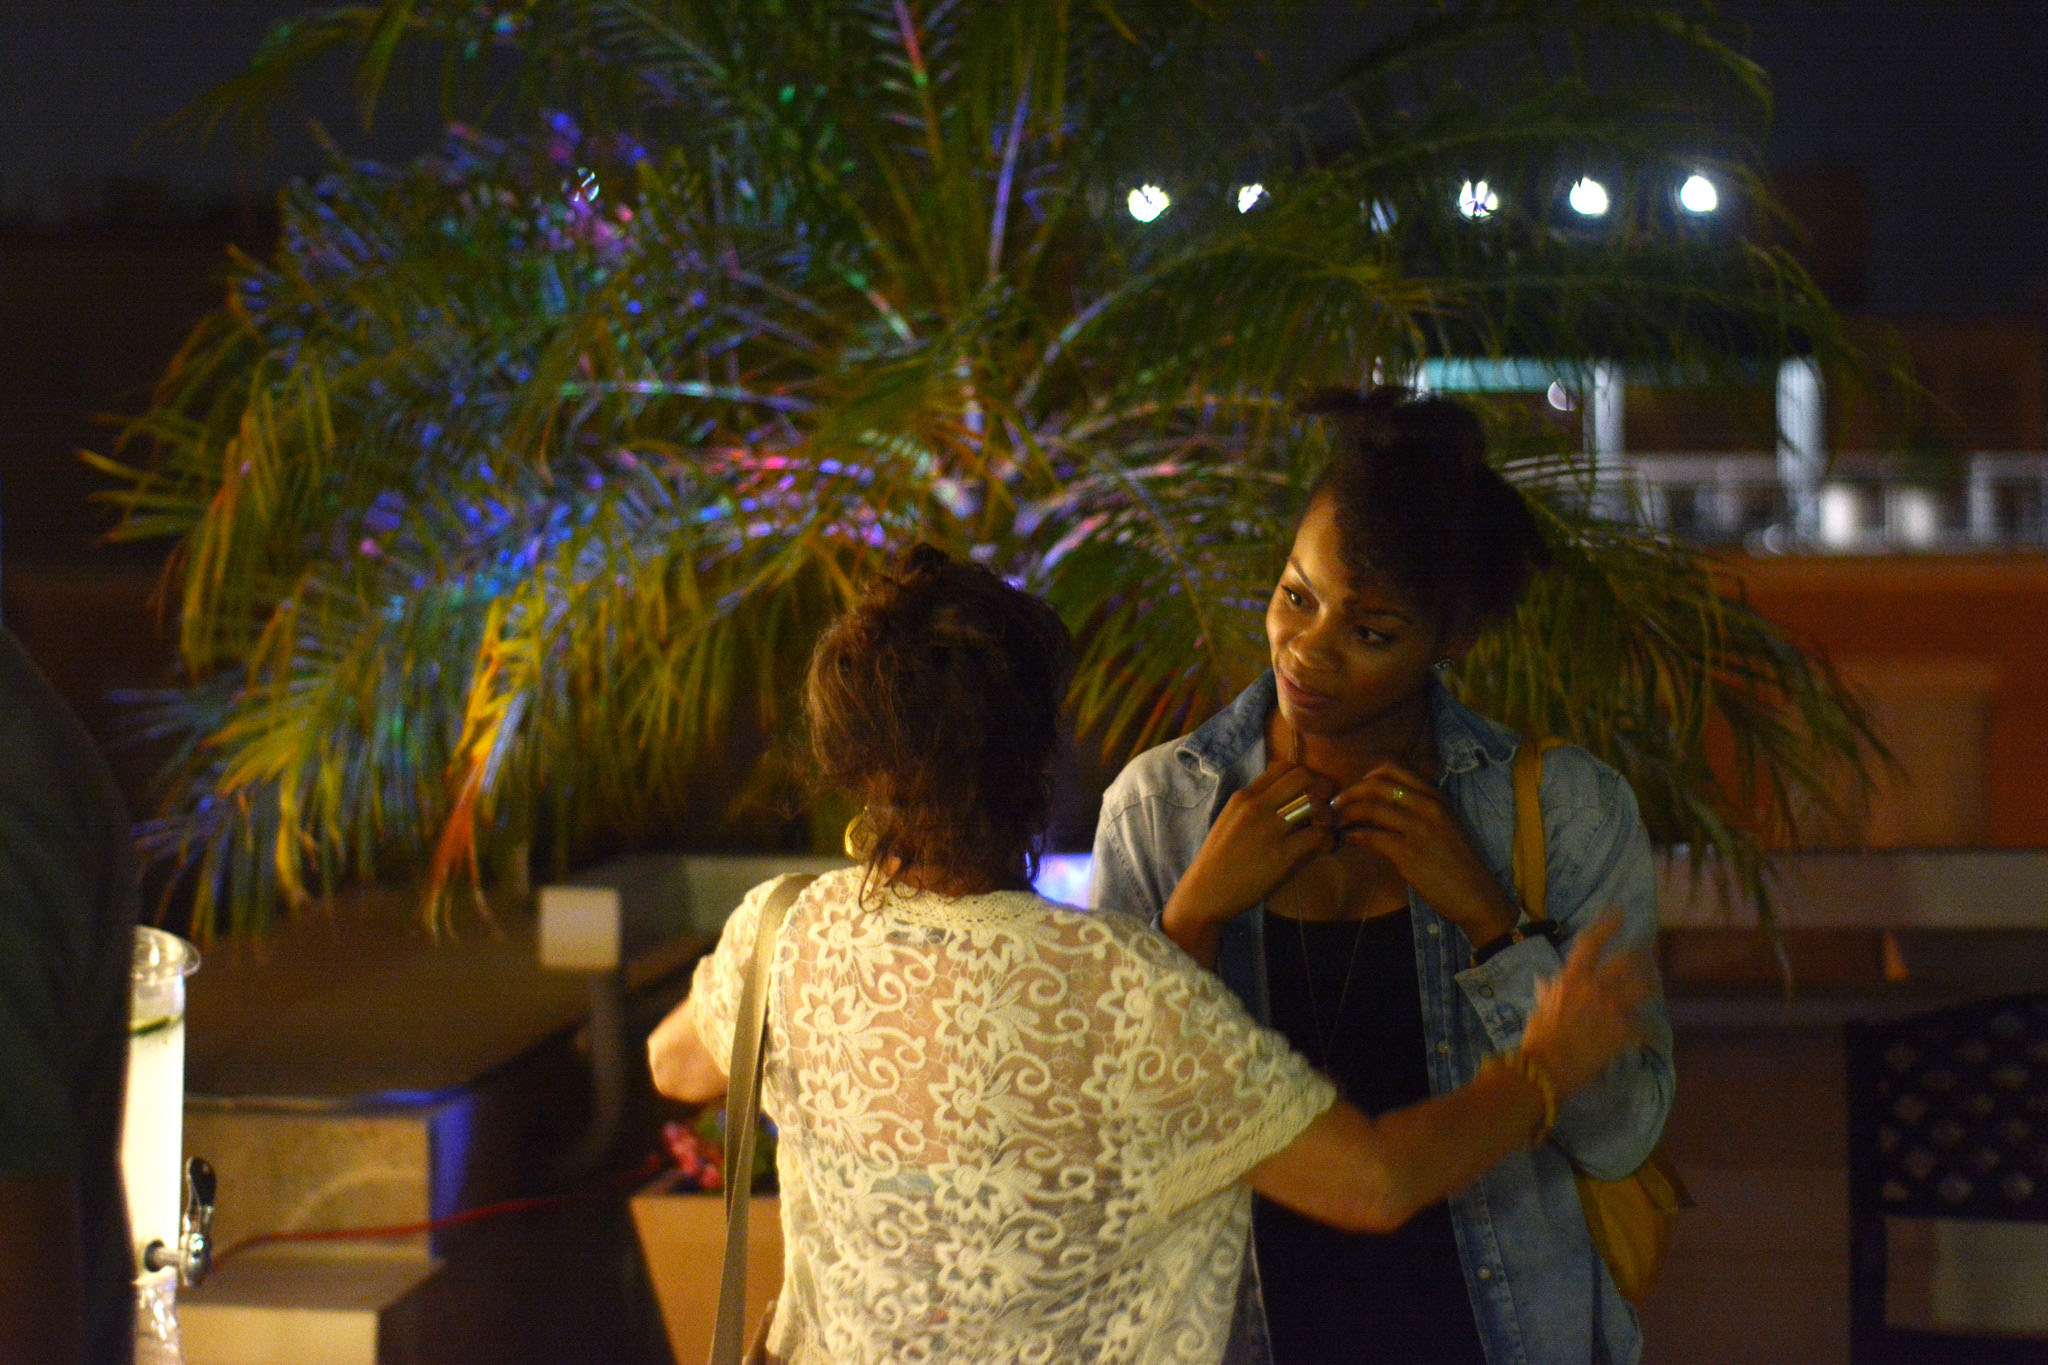 Filmmakers and guests mingle at a rooftop party at DC Shorts. (Courtesy DC Shorts)